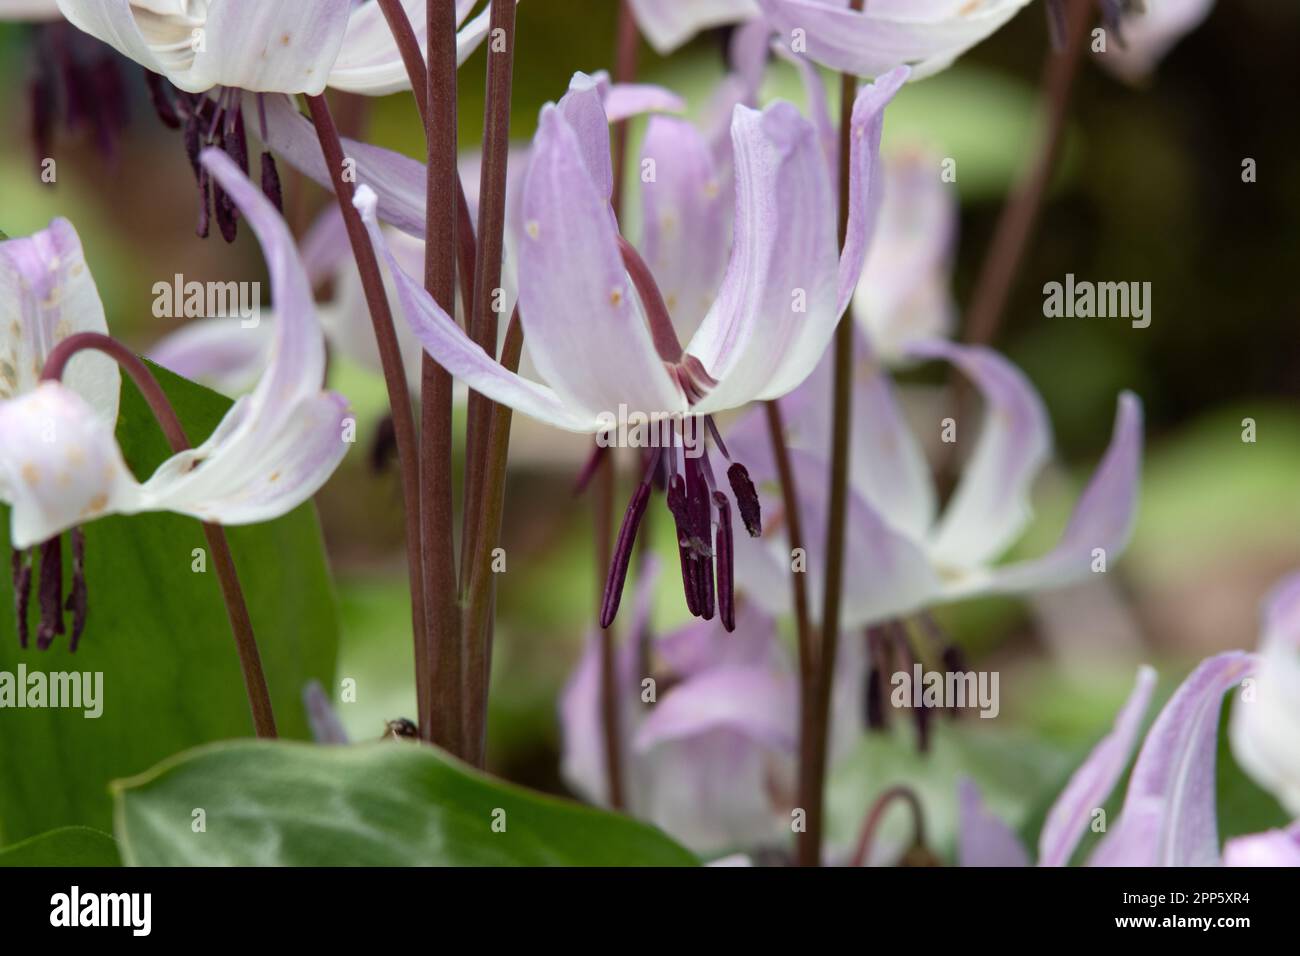 Erythronium dens-canis 'Pink Perfection' Stock Photo